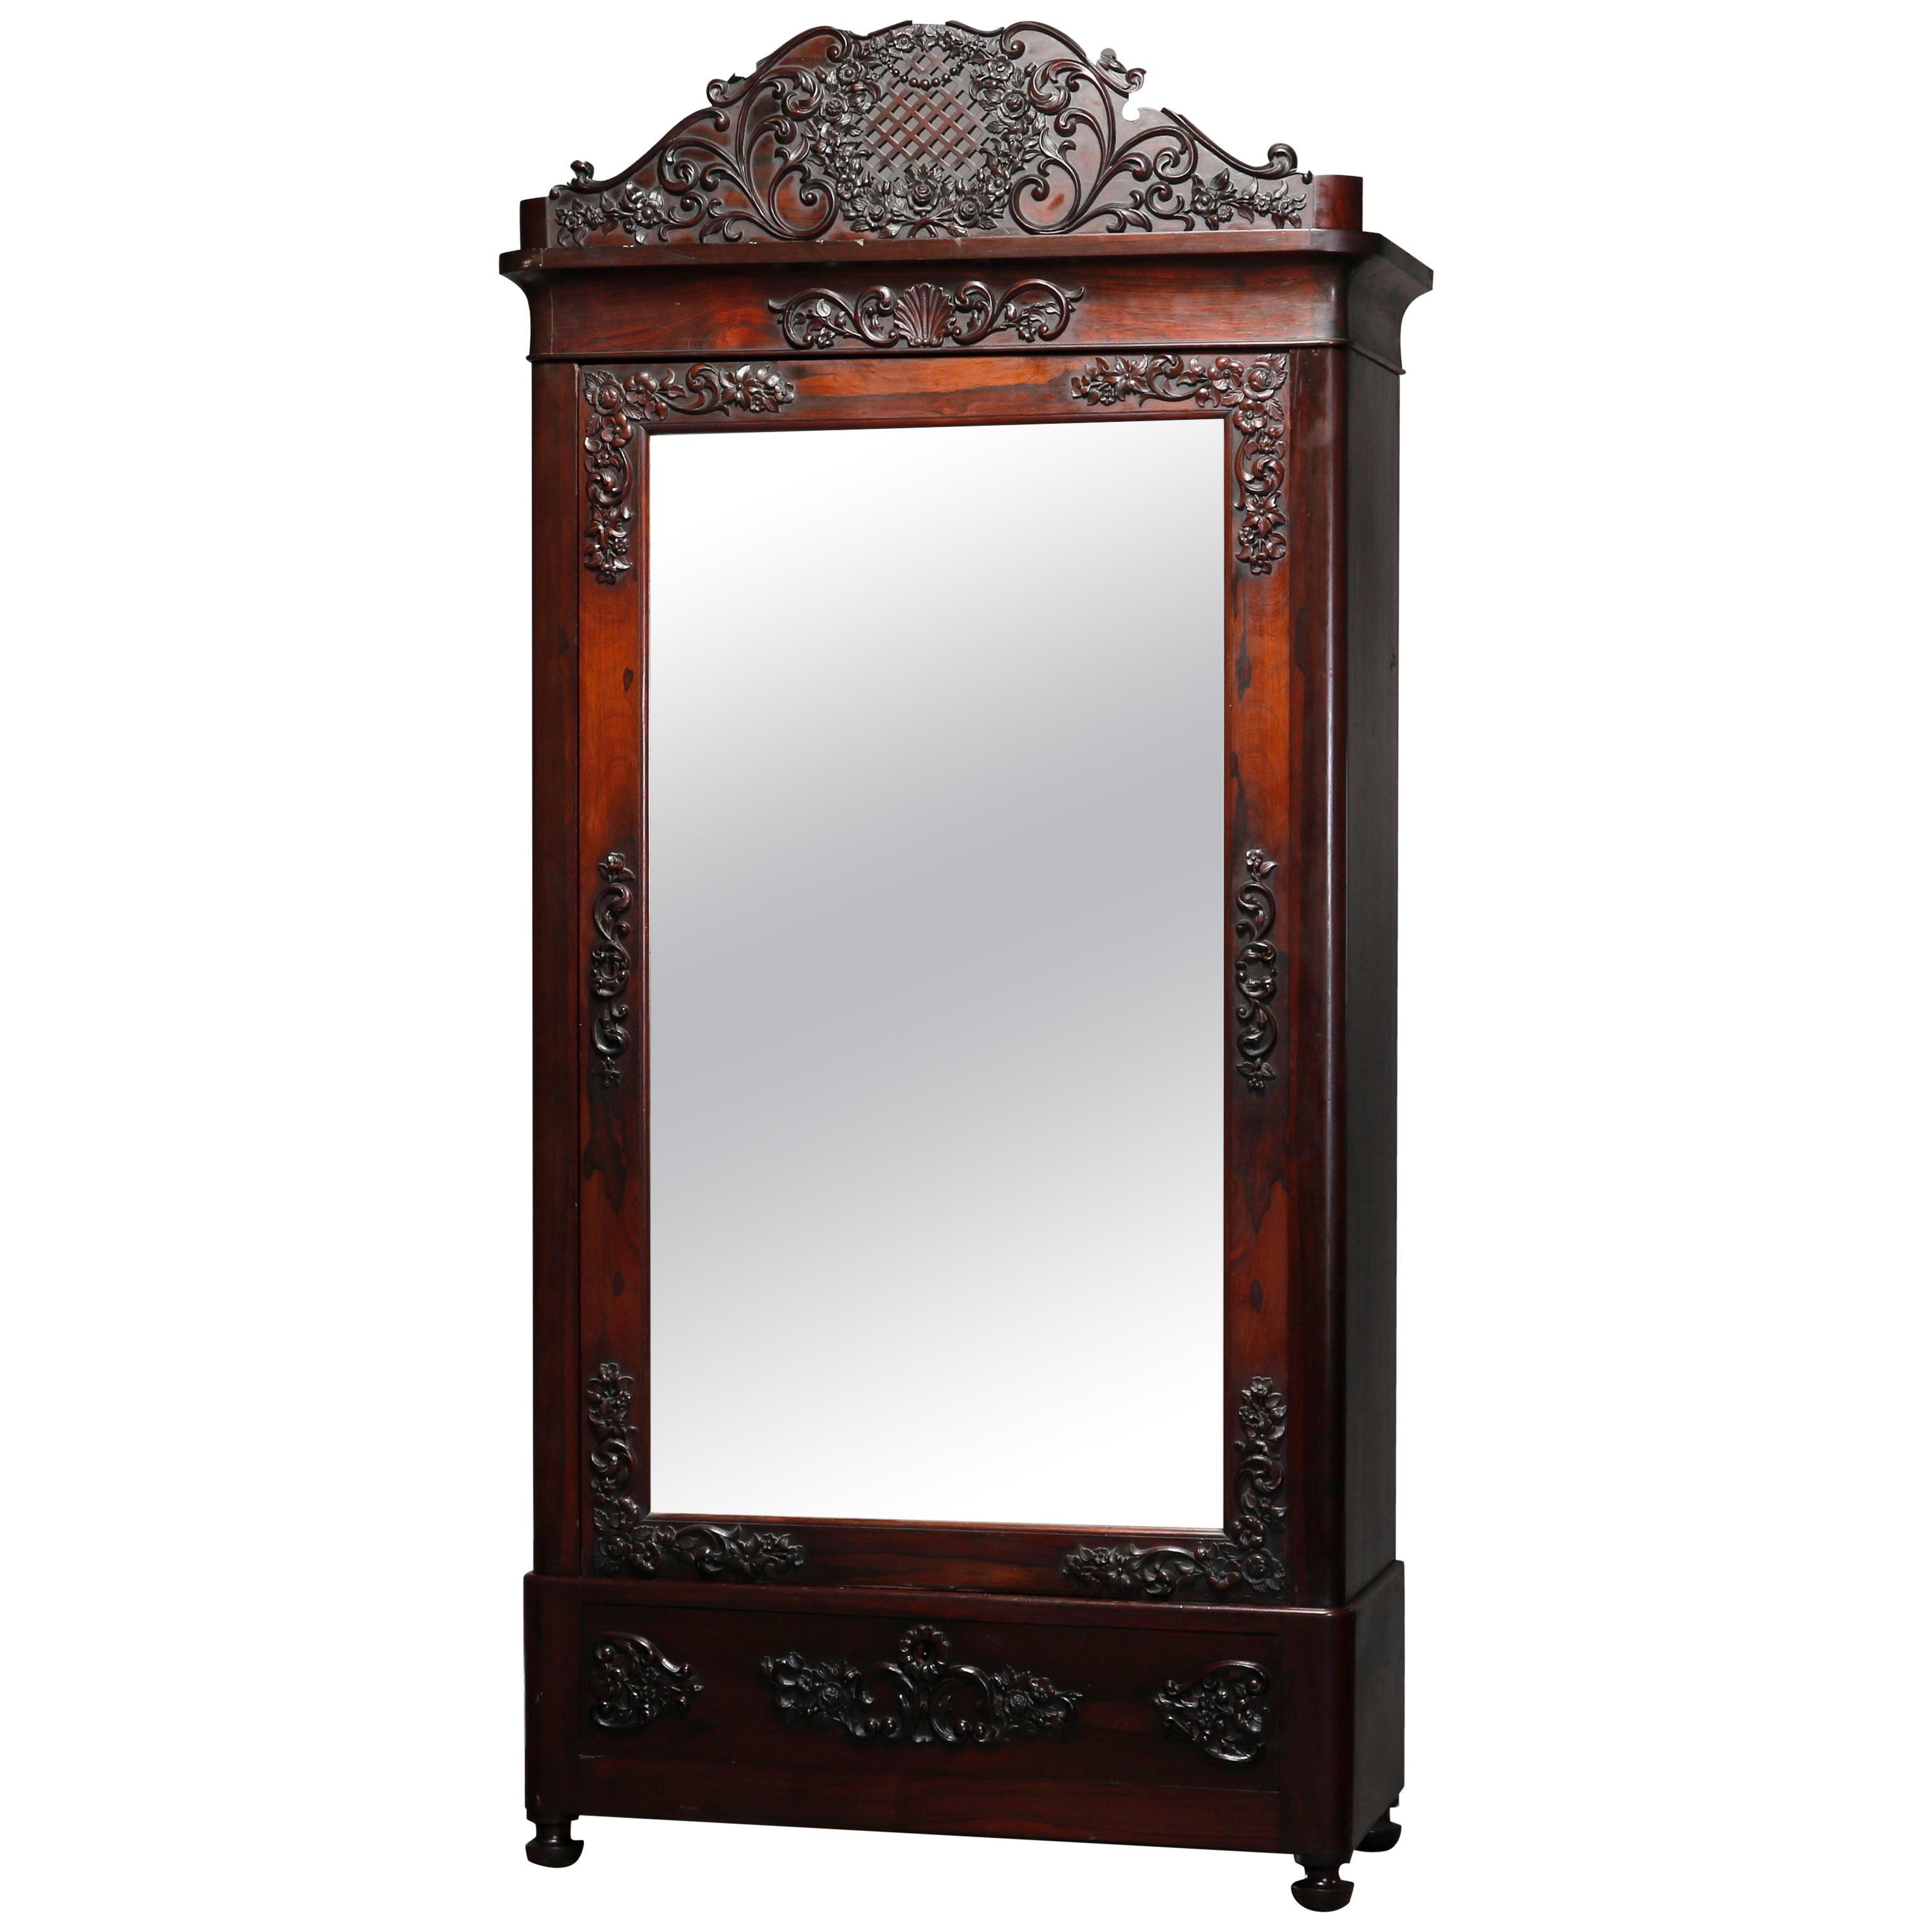 Antique Rococo Revival Carved Rosewood Mirrored Armoire, circa 1860